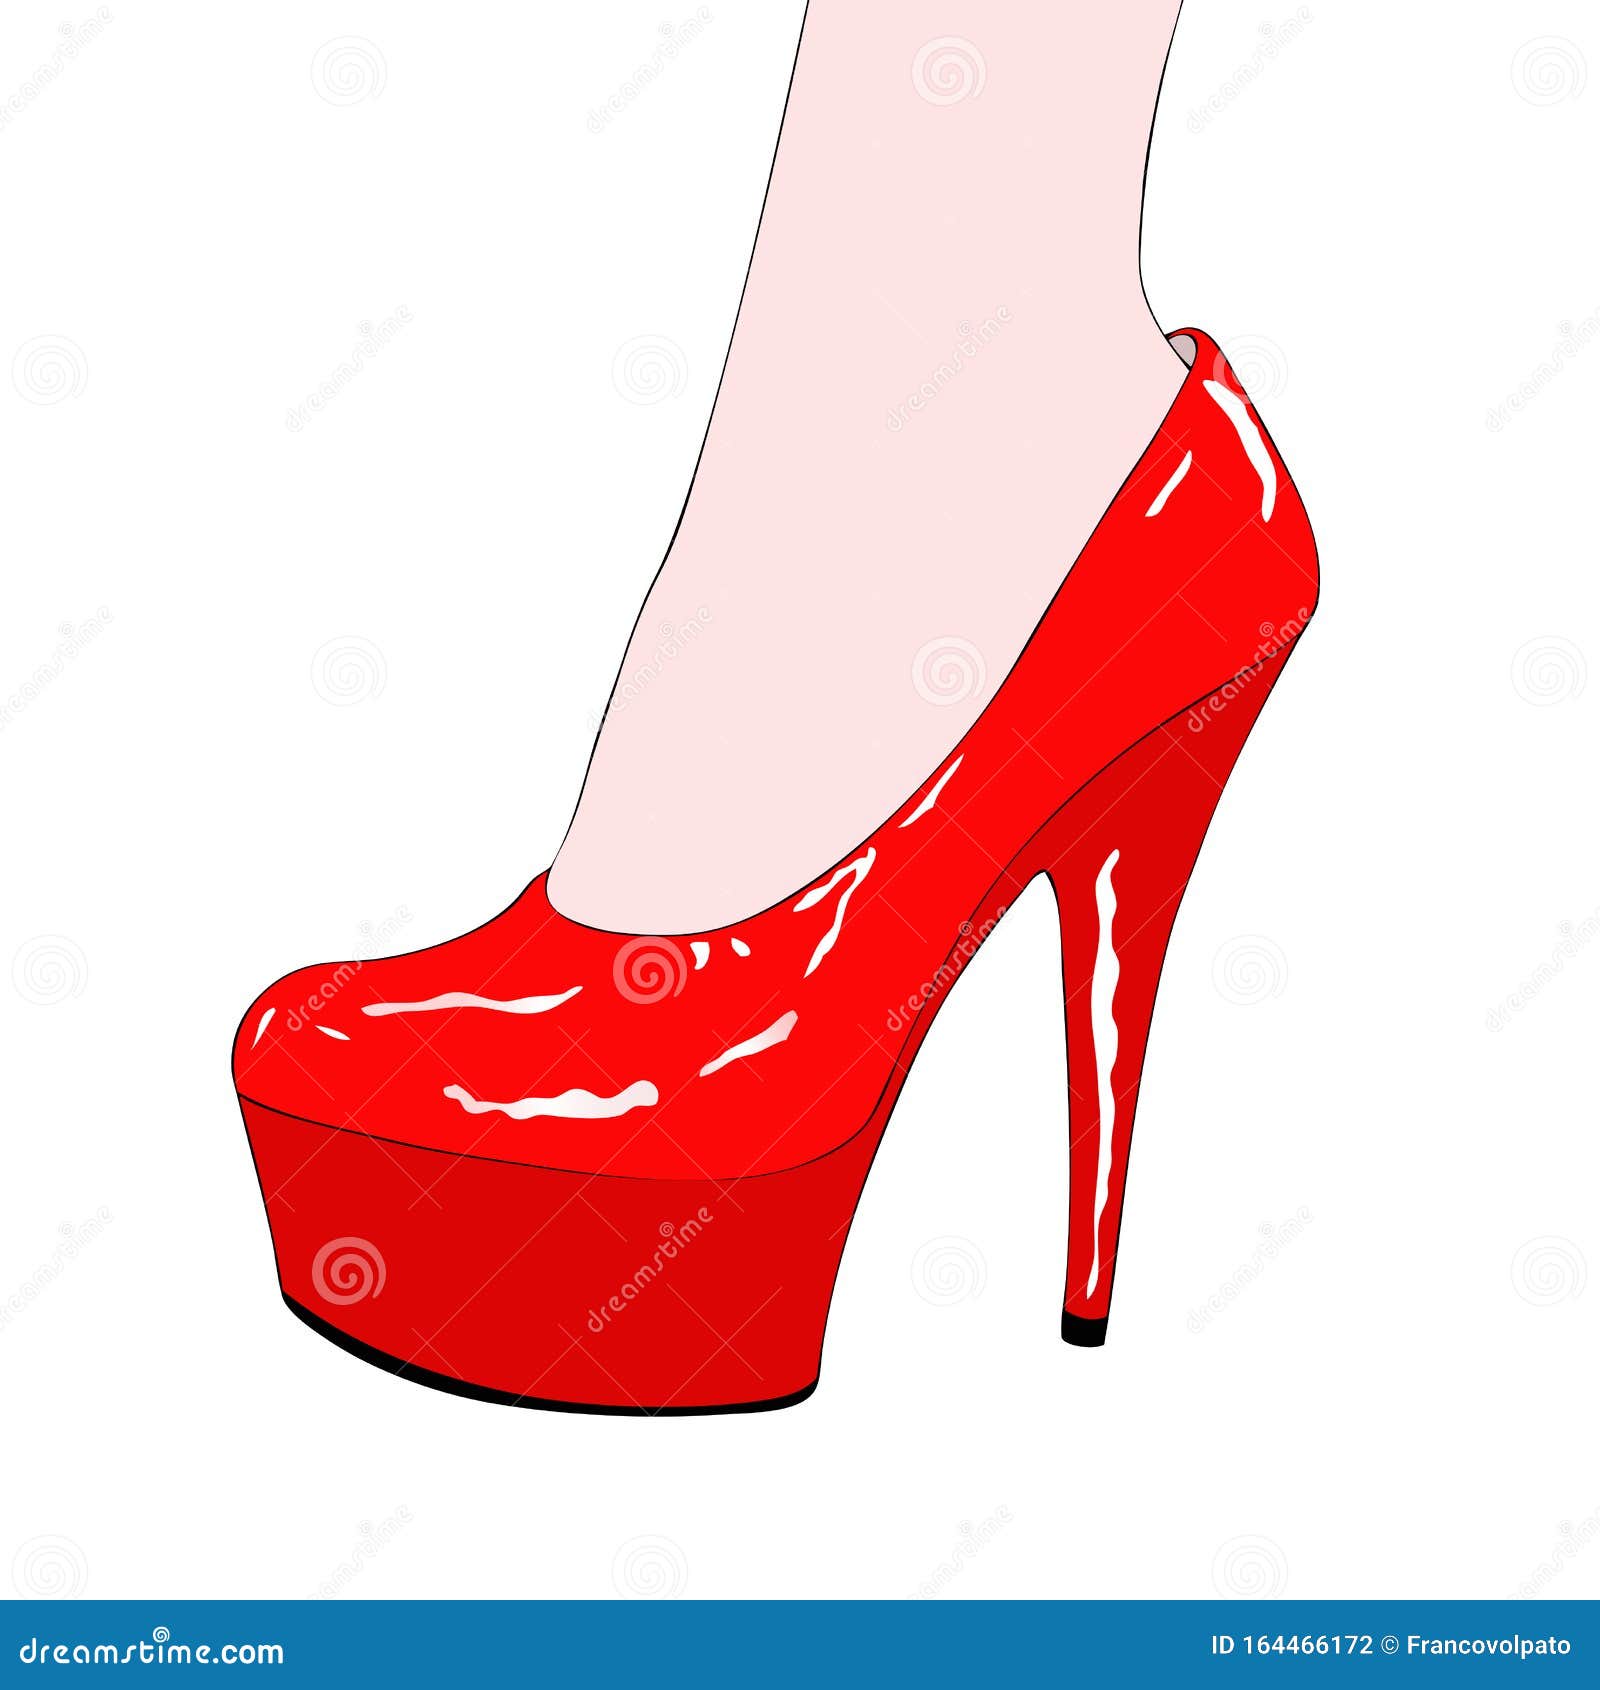 Lovely Shoes with High Heels Stock Illustration - Illustration of ...